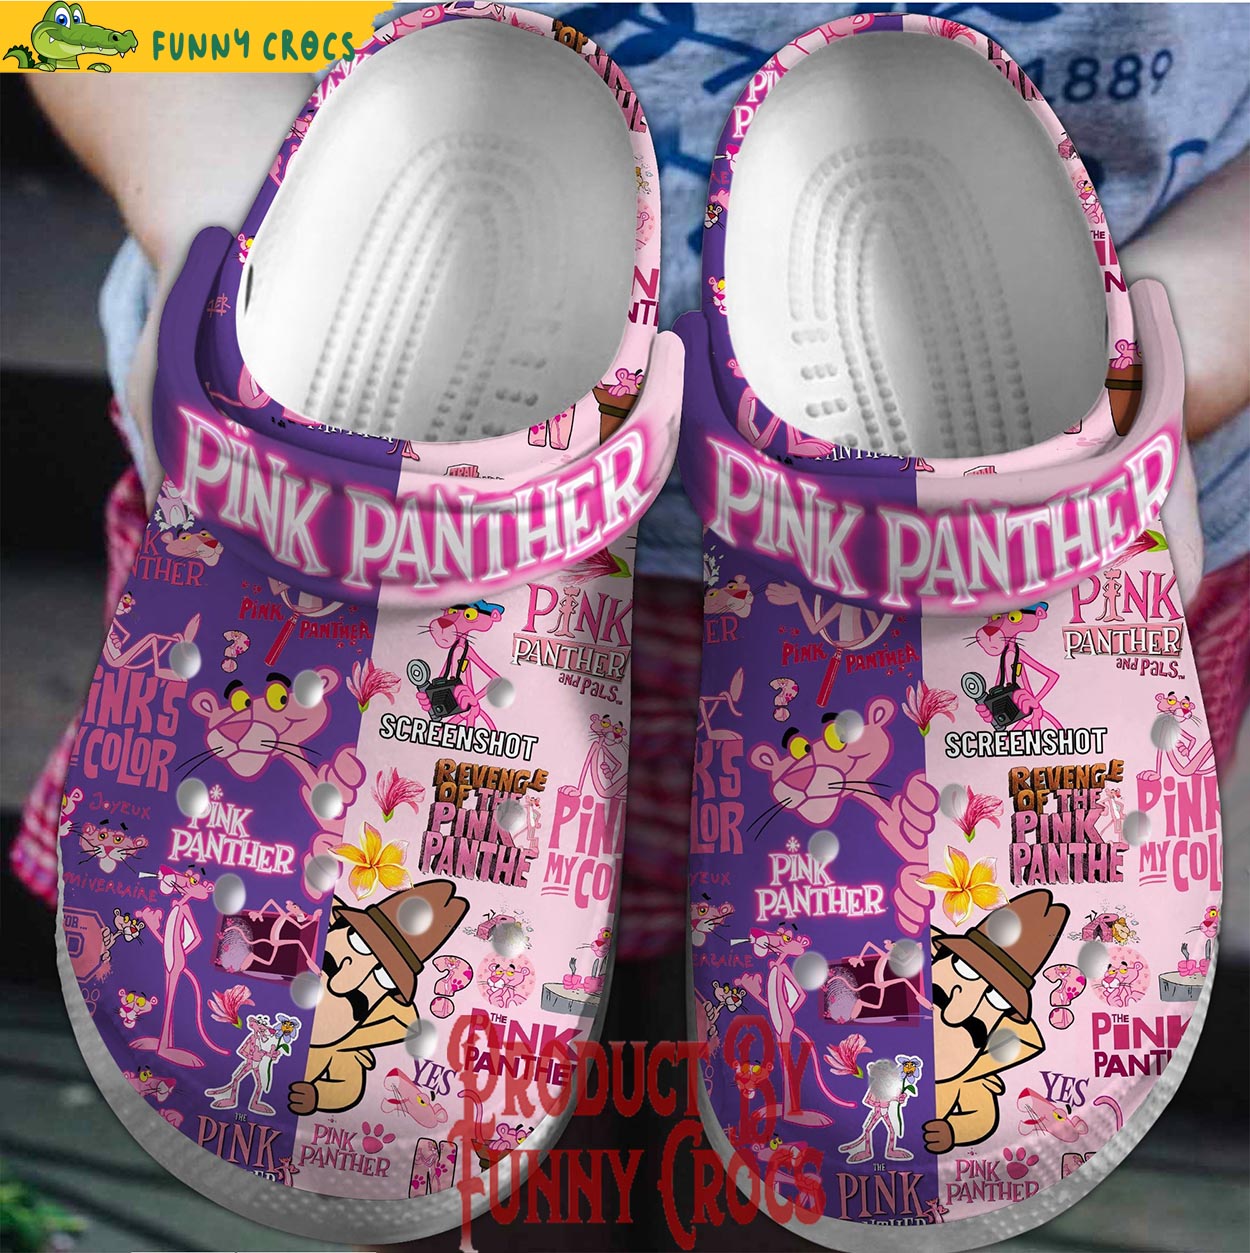 The Pink Panther Crocs Clogs Shoes Comfortable